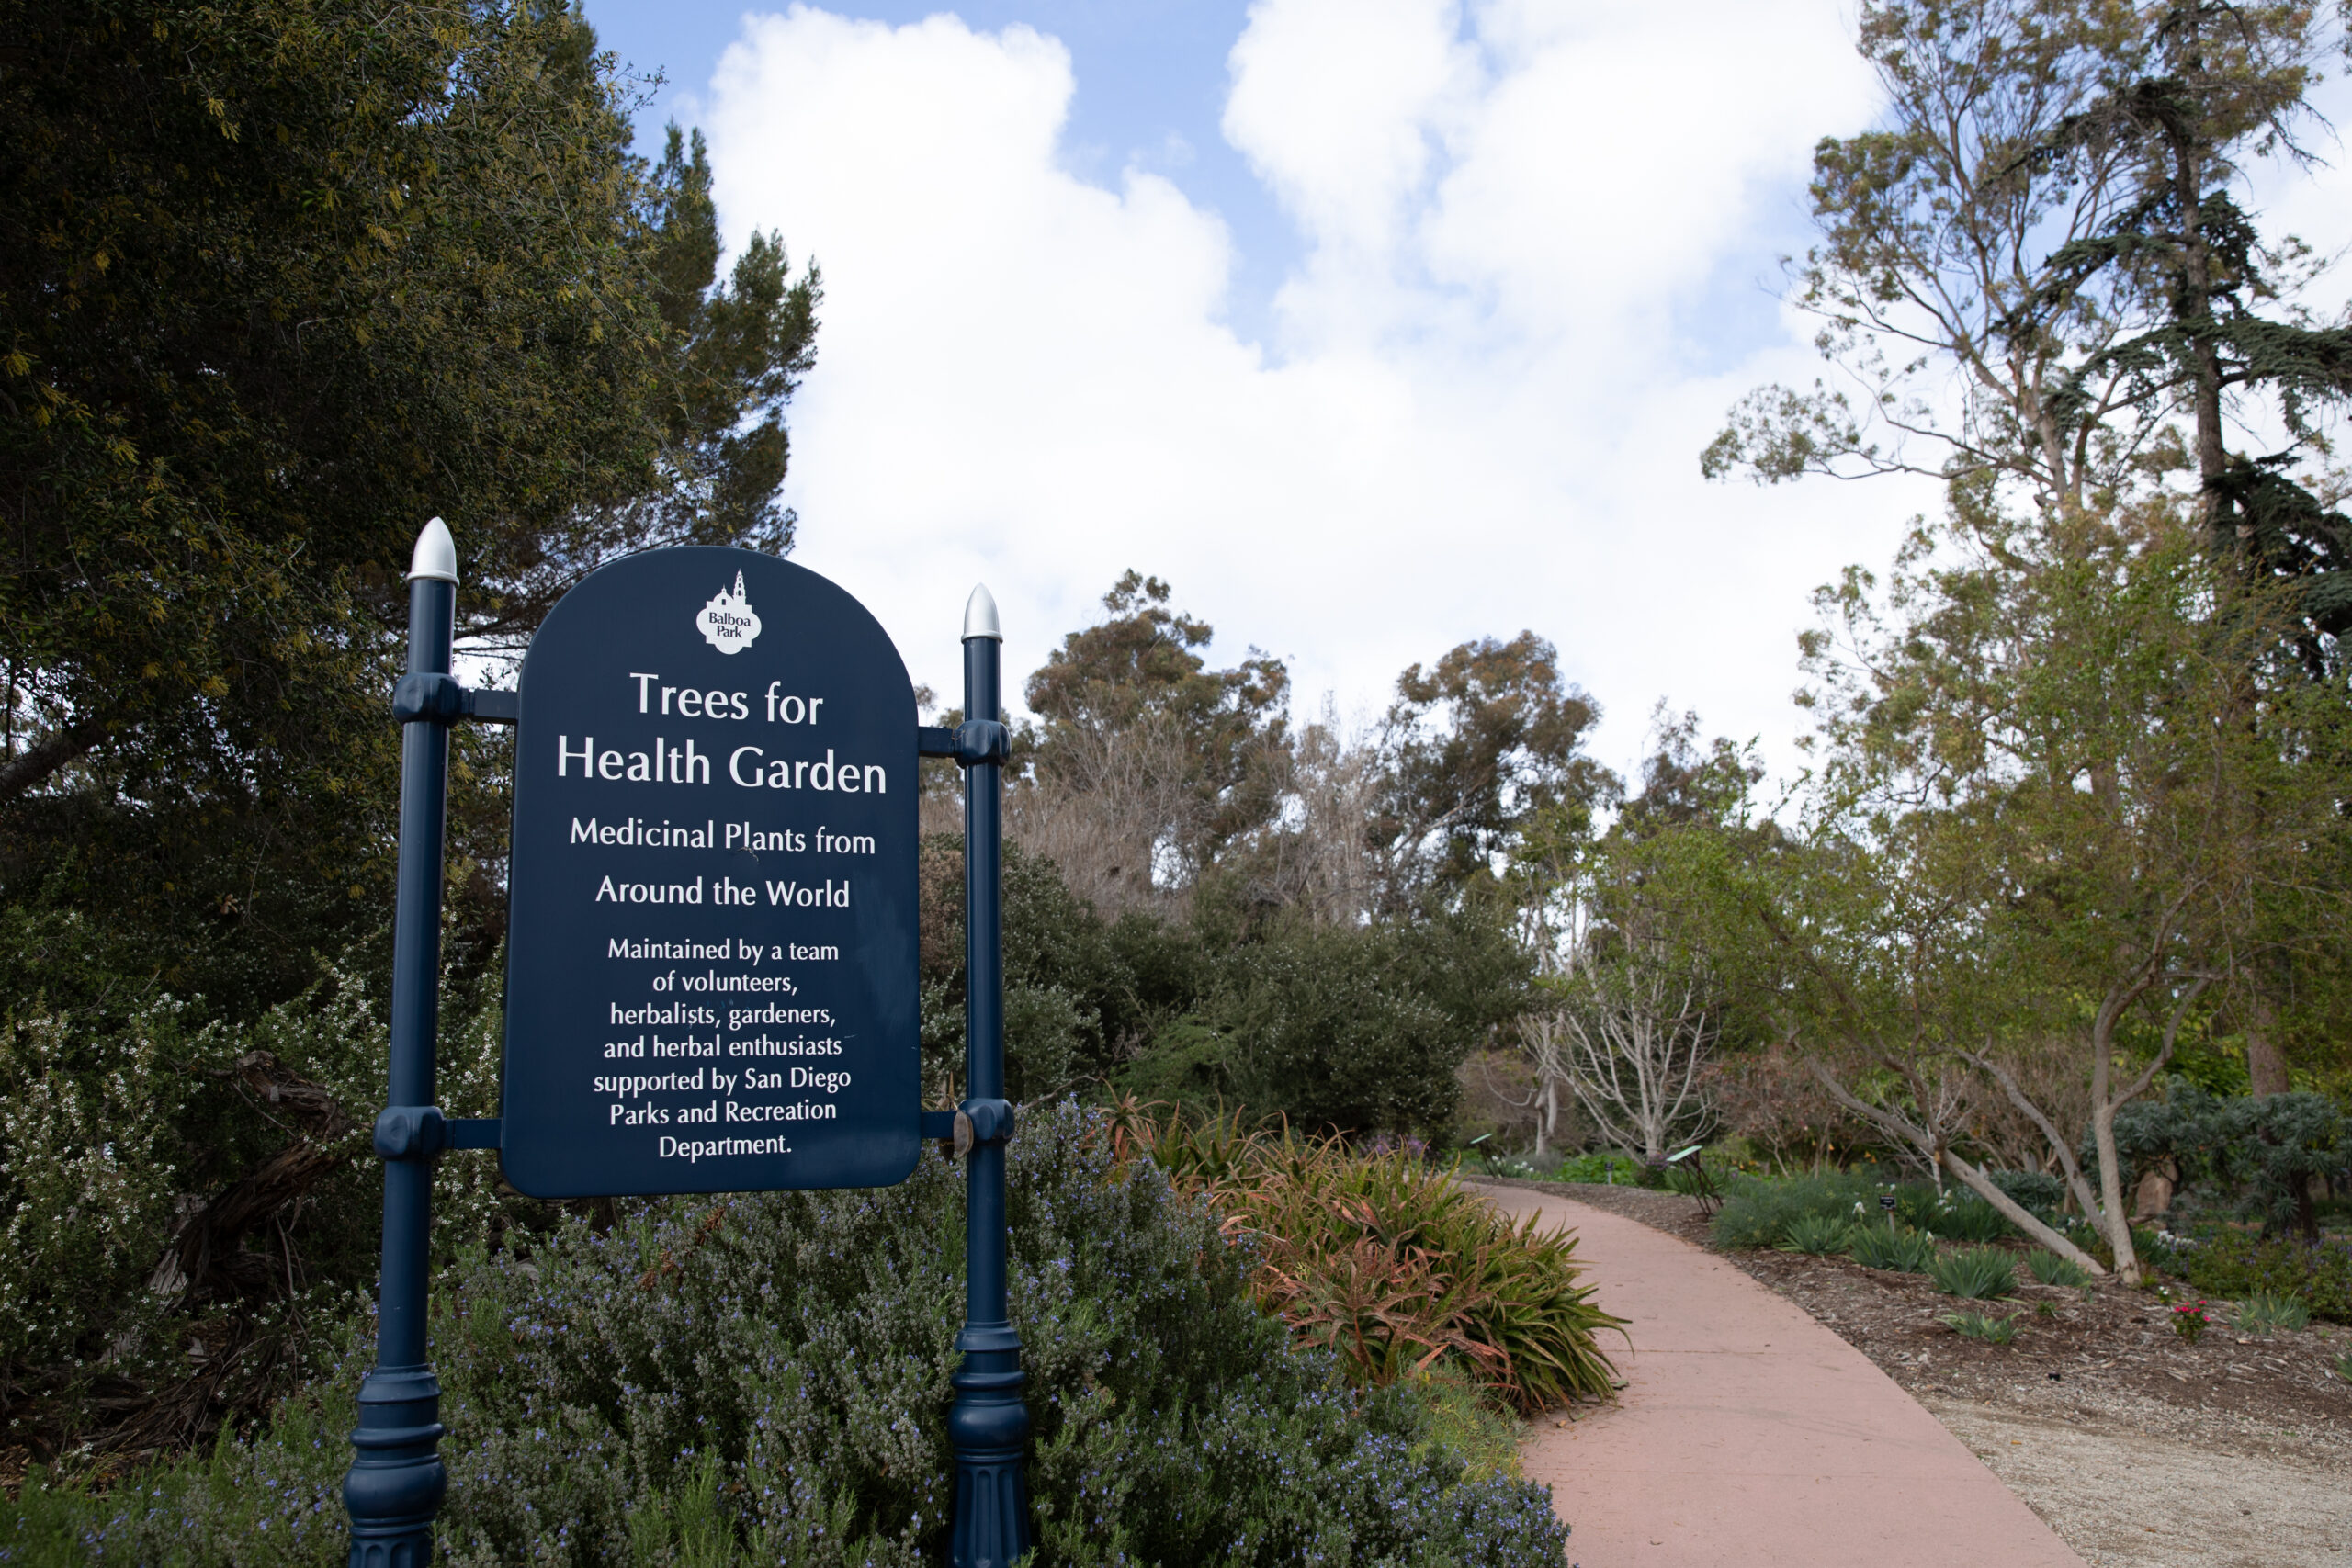 Trees for Health Garden sign that states the garden has medicinal plants from around the world and is maintained by a team of volunteers, herbalists, gardeners, and herbal enthusiasts support by San Diego Parks and Recreation Department.